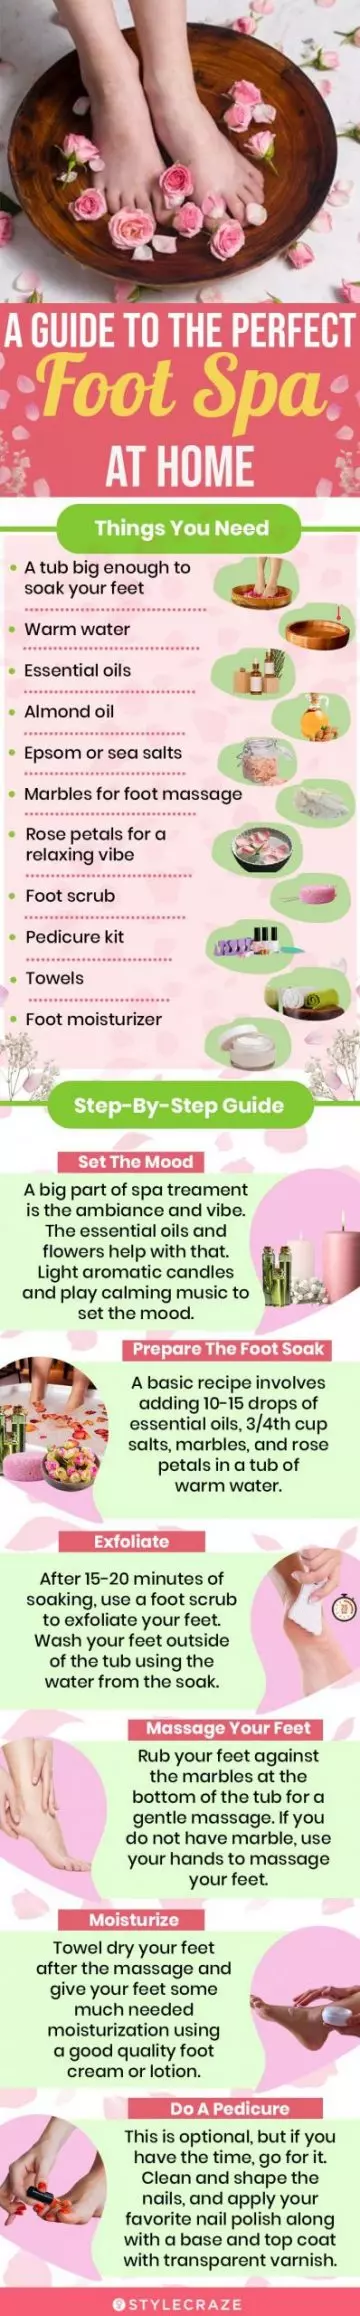  a guide to the perfect foot spa at home (infographic) 